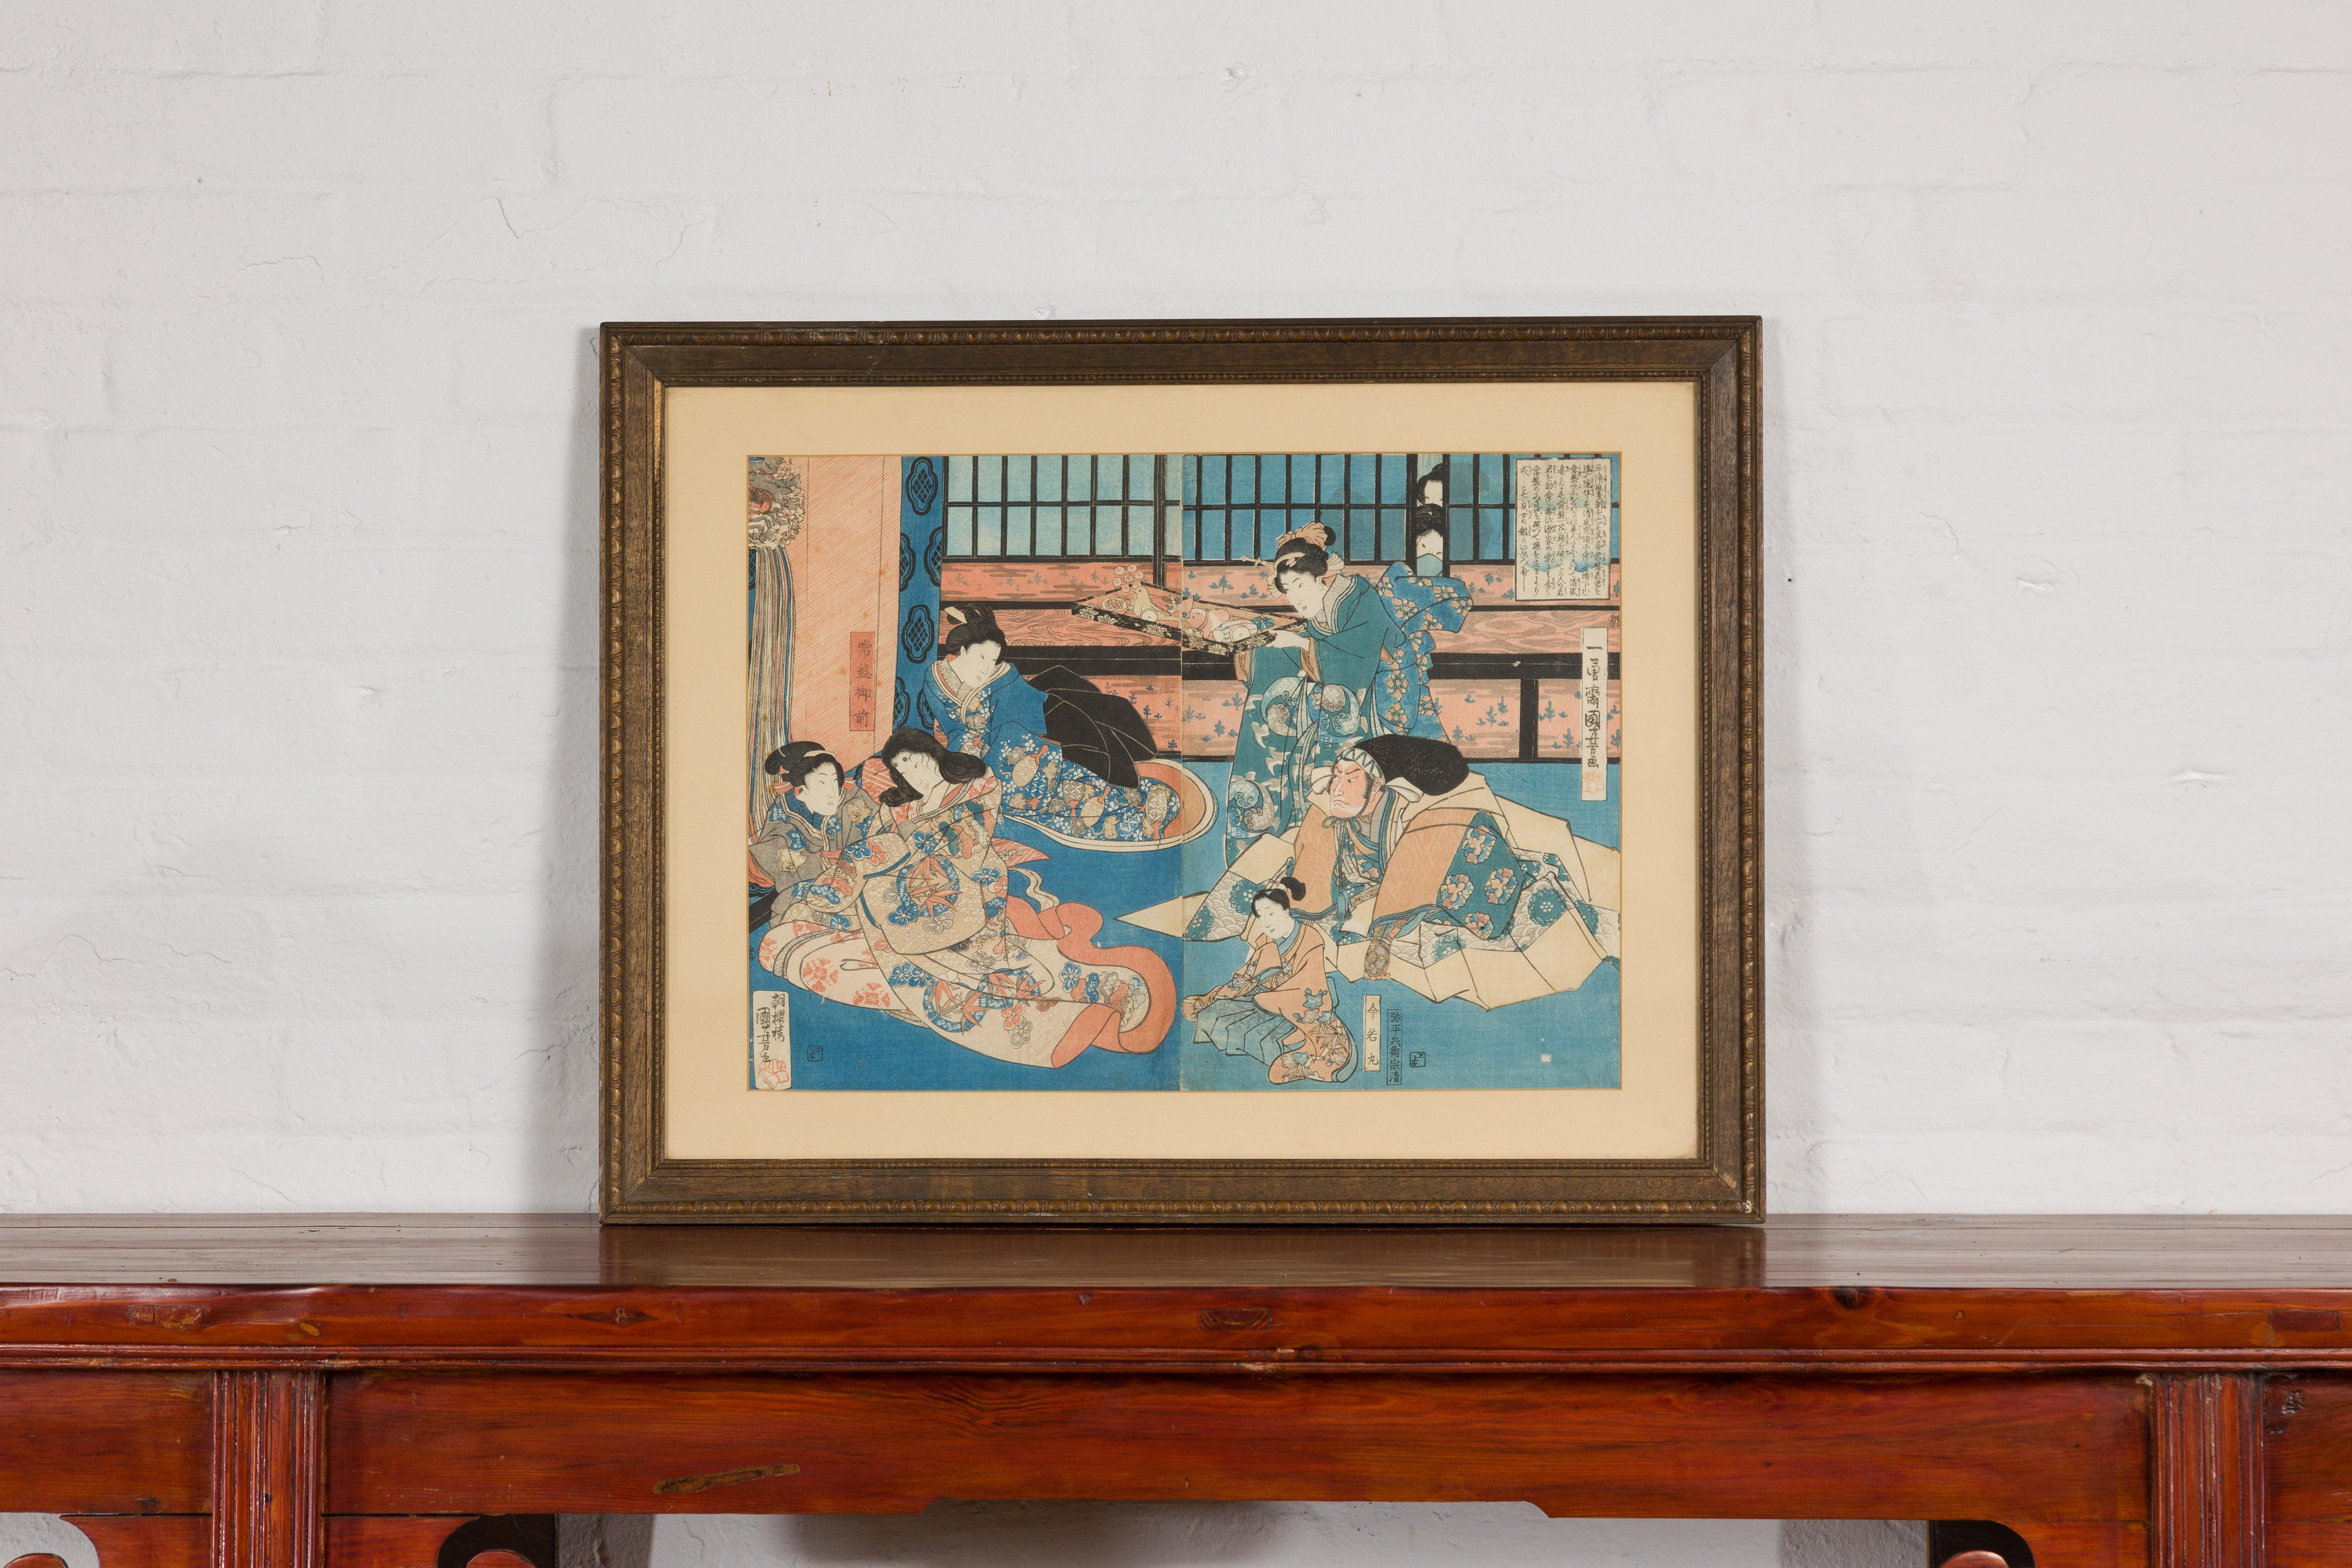 An antique Japanese Edo period diptych woodblock print from the early to mid 19th century, signed by Utagawa Kuniyoshi. Immerse yourself in the Japanese Edo period artistry with this antique 19th-century diptych woodblock print. Signed by the